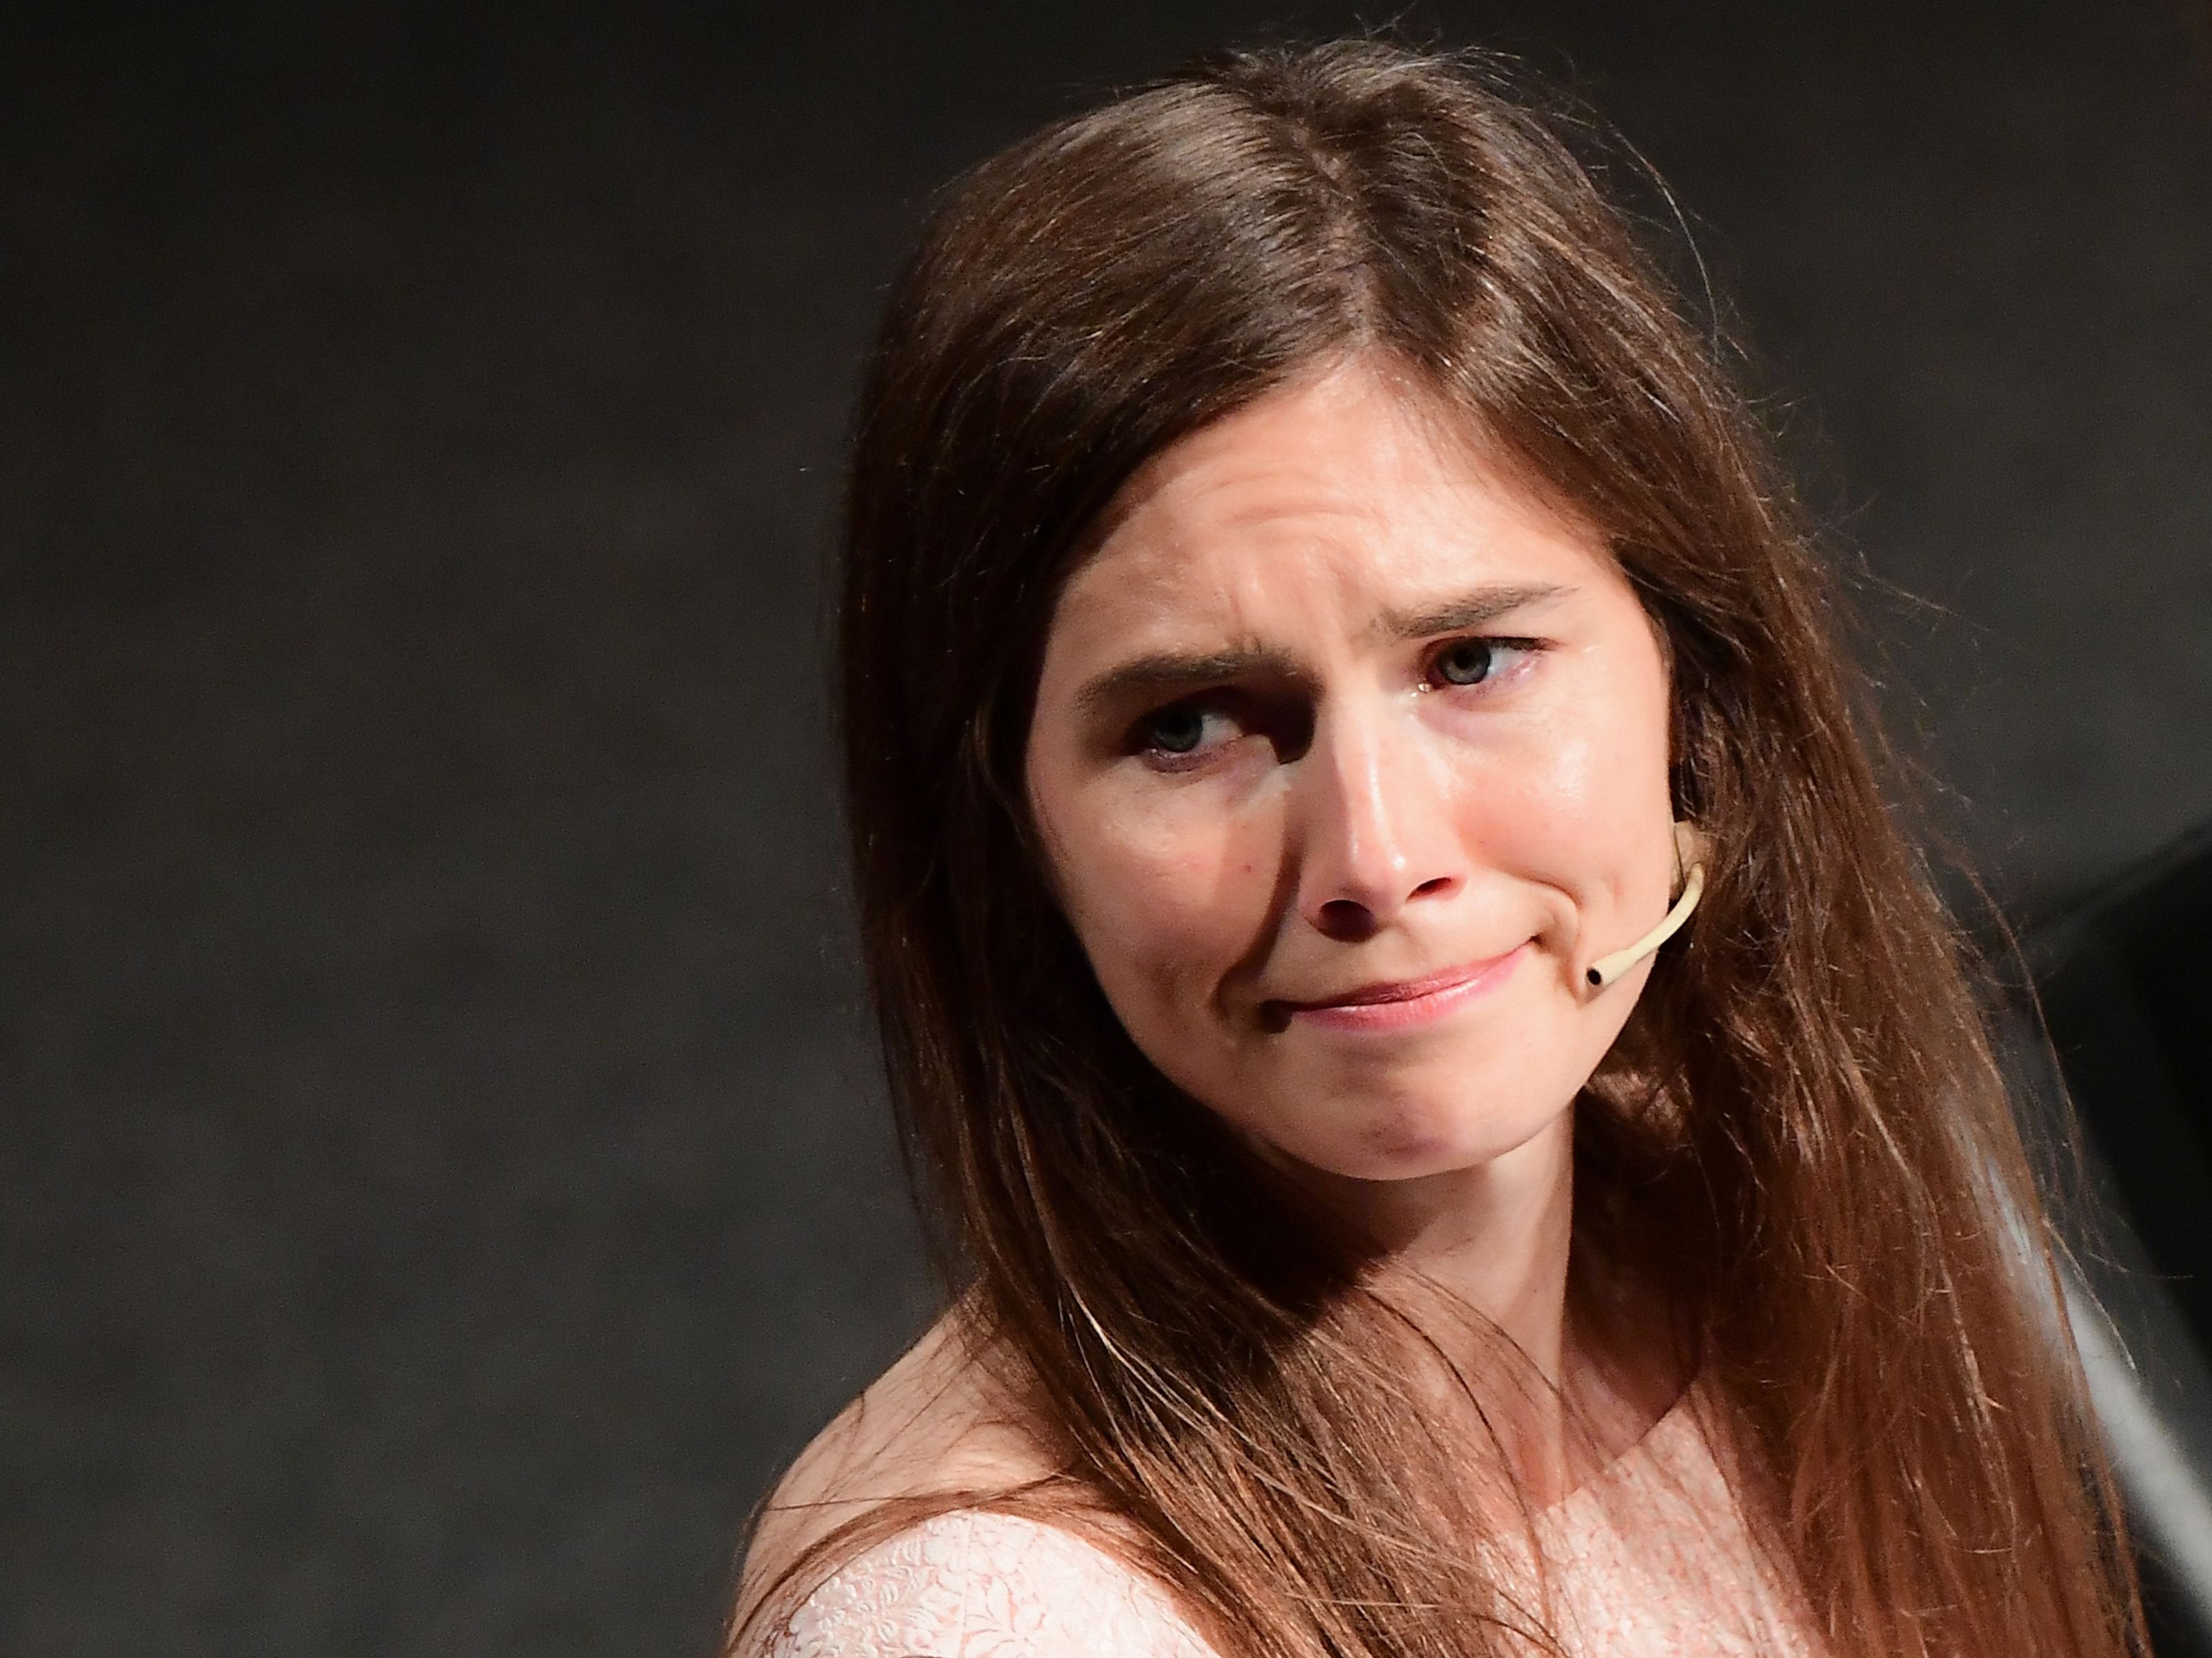 Amanda Knox attends a panel discussion titled ‘Trial by Media’ during the Criminal Justice Festival at the Law University of Modena, northern Italy on 15 June 2019